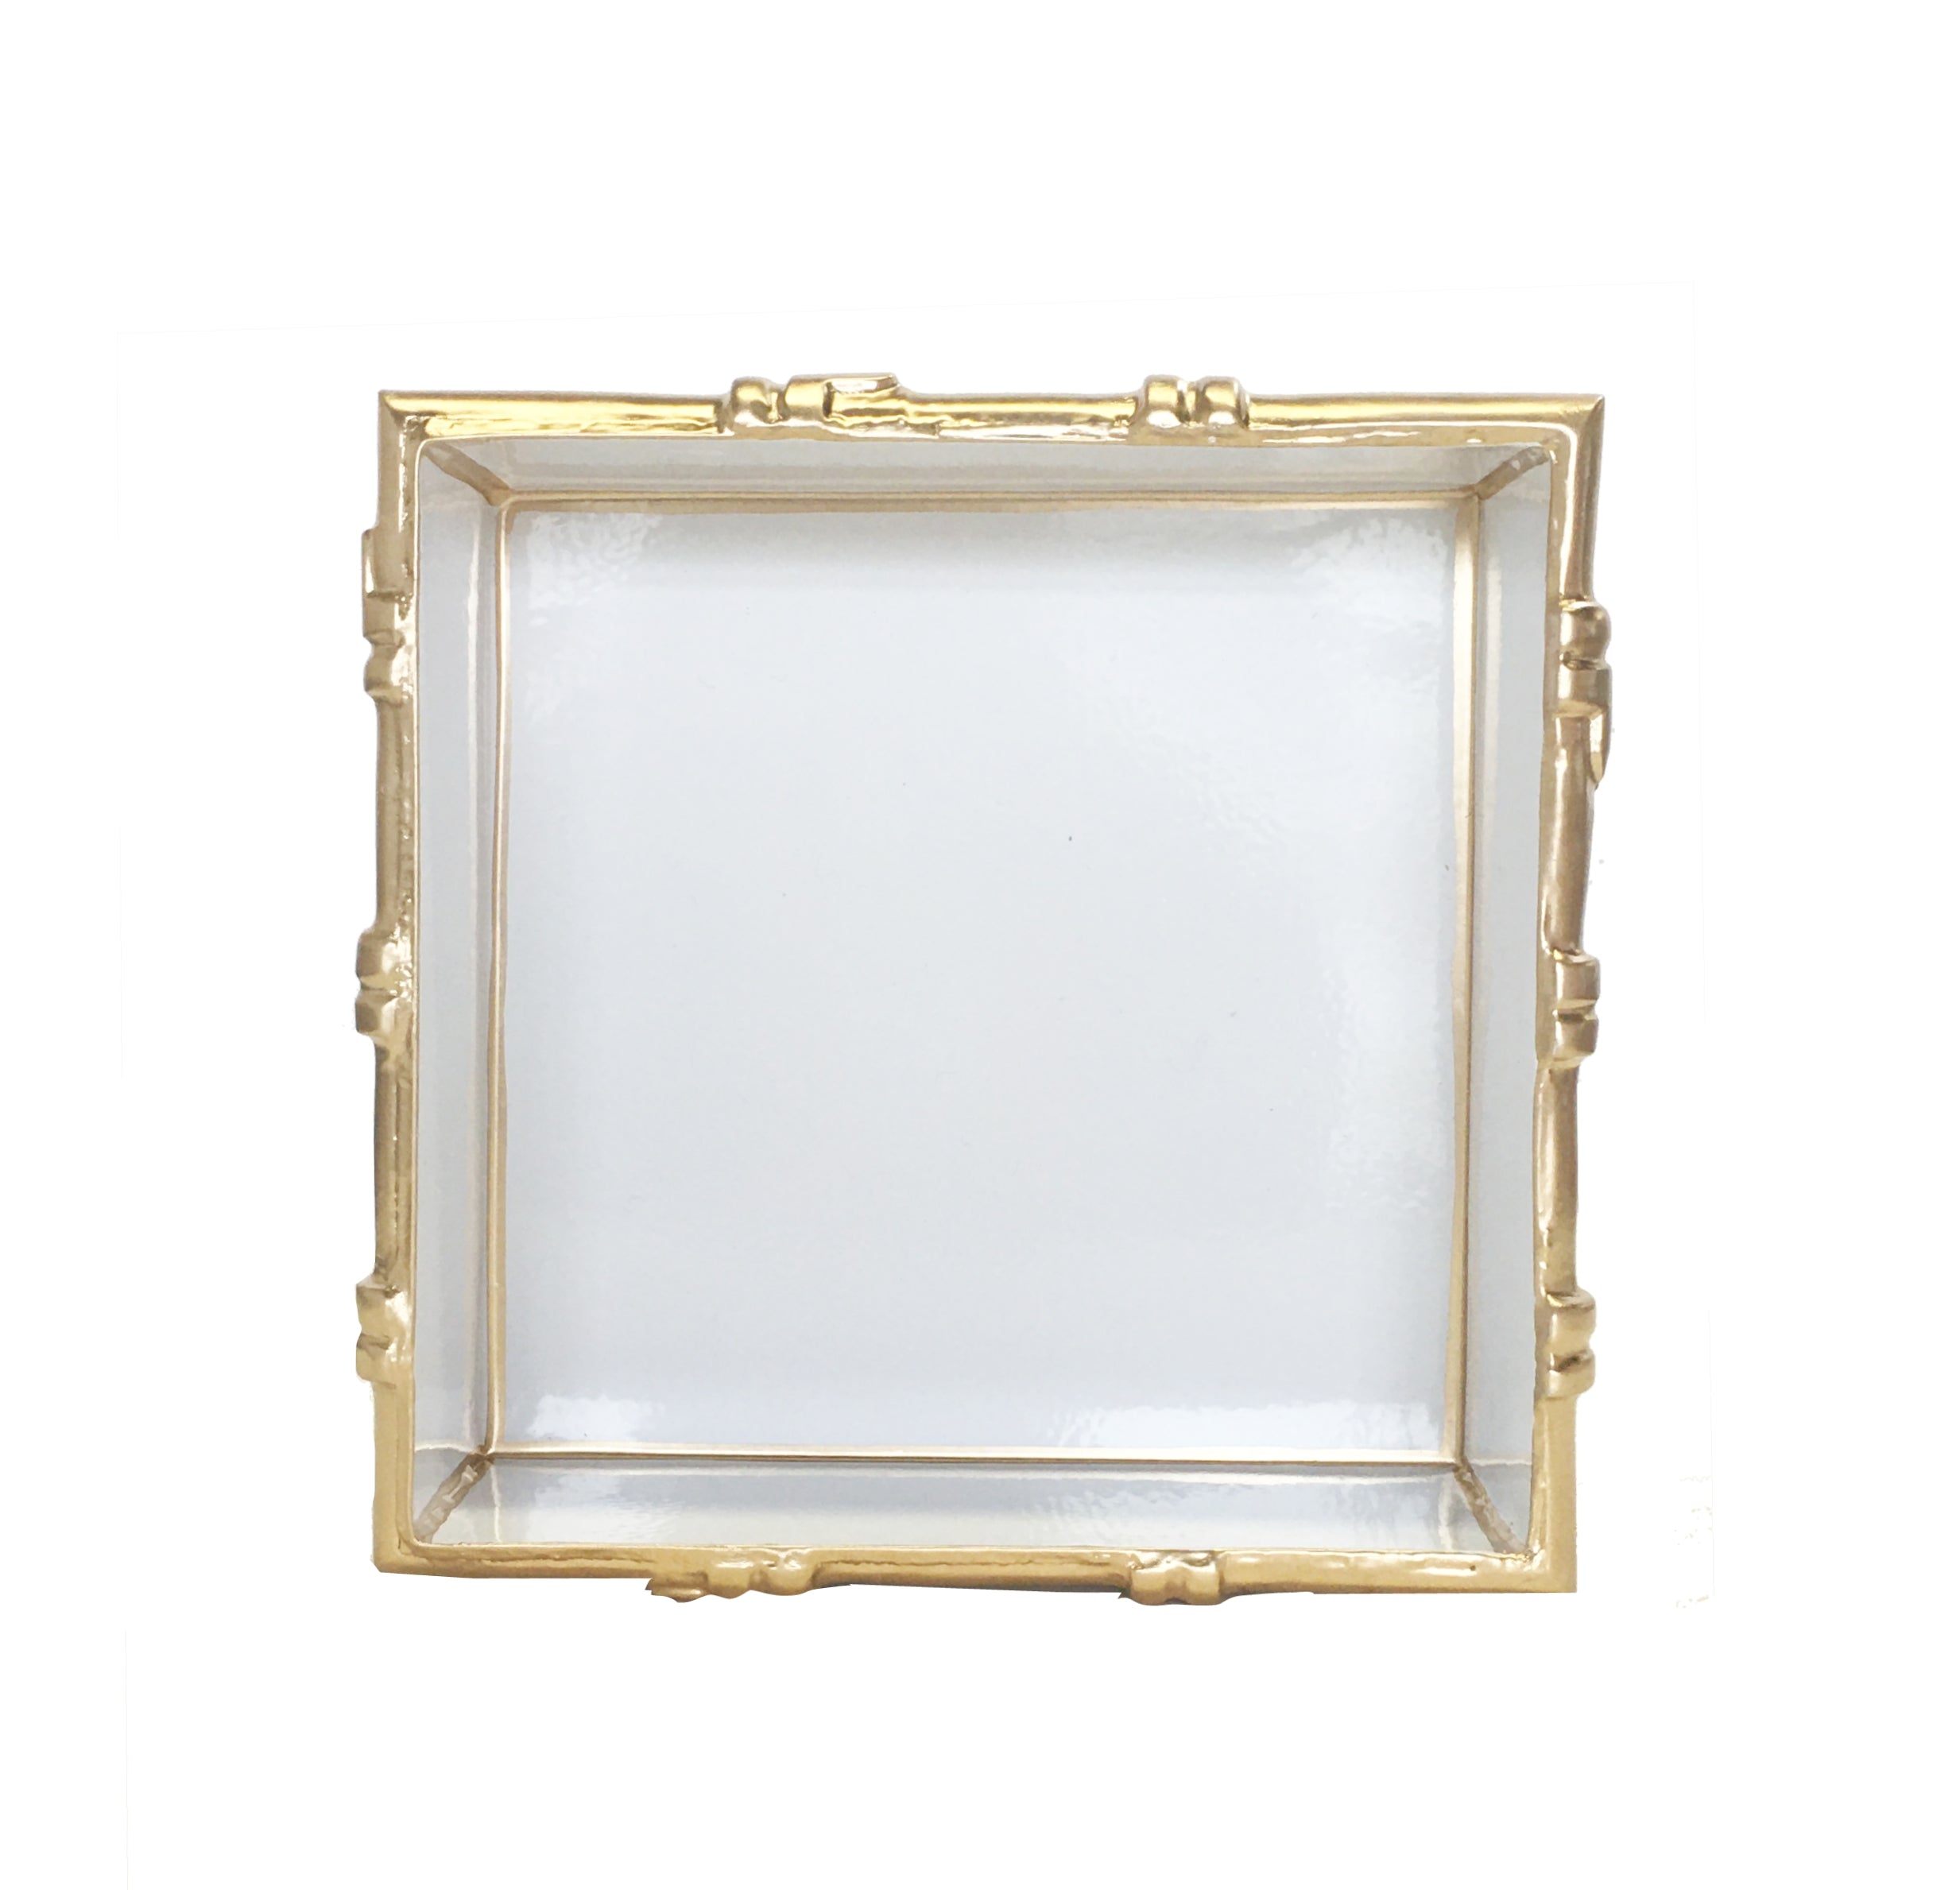 Bamboo in White Square Tray